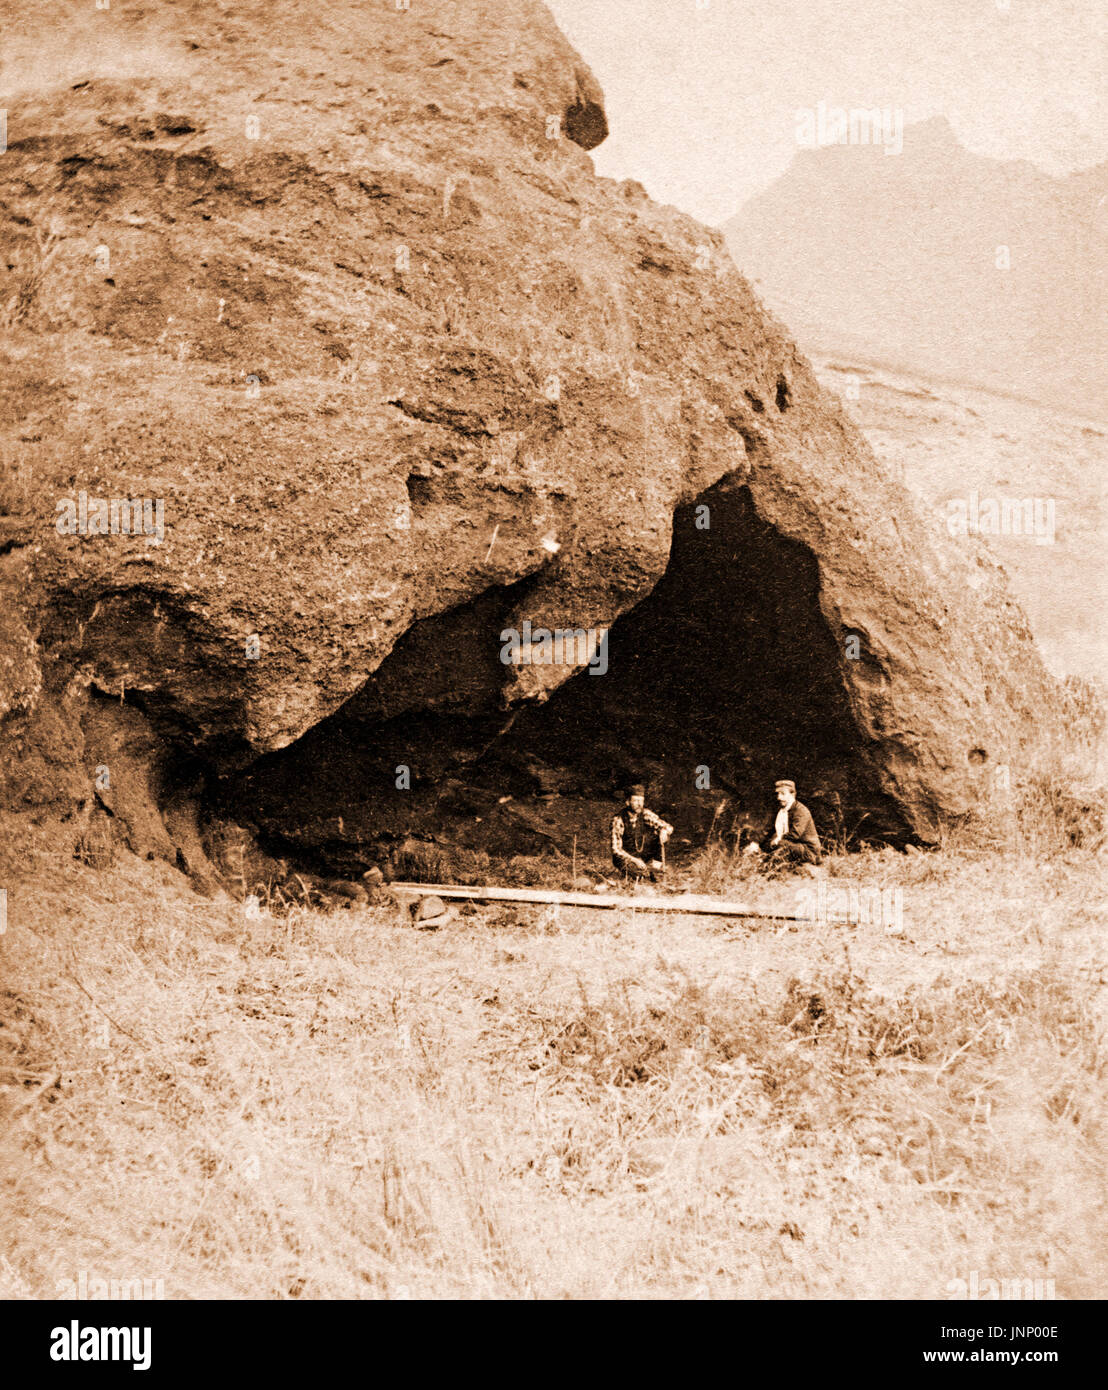 Selkirk's Cave, Island of Juan Fernandez off the coast of Chile, scene of the story of Robinson Crusoe based on Alexander Selkirk's marooned stay of over four years, photo shot in 1874 Stock Photo